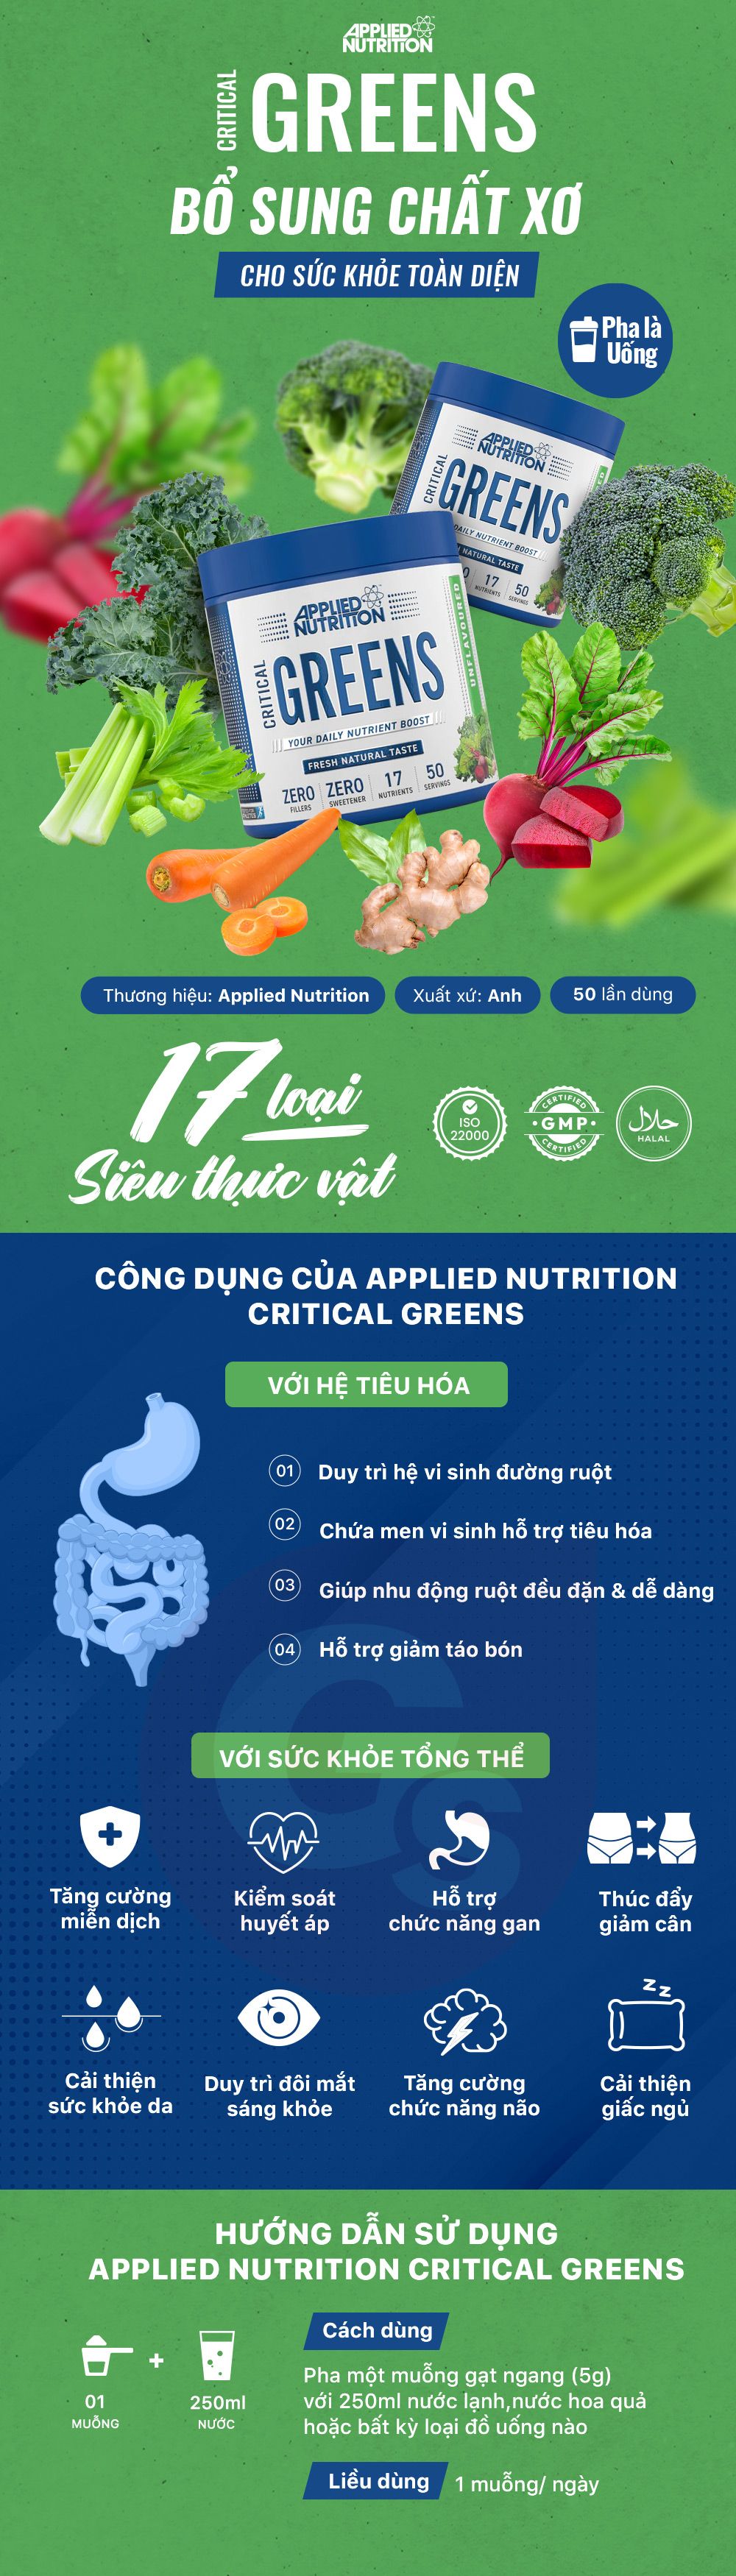 applied-nutrition-critical-greens-bot-uong-bo-sung-chat-xo-gymstore